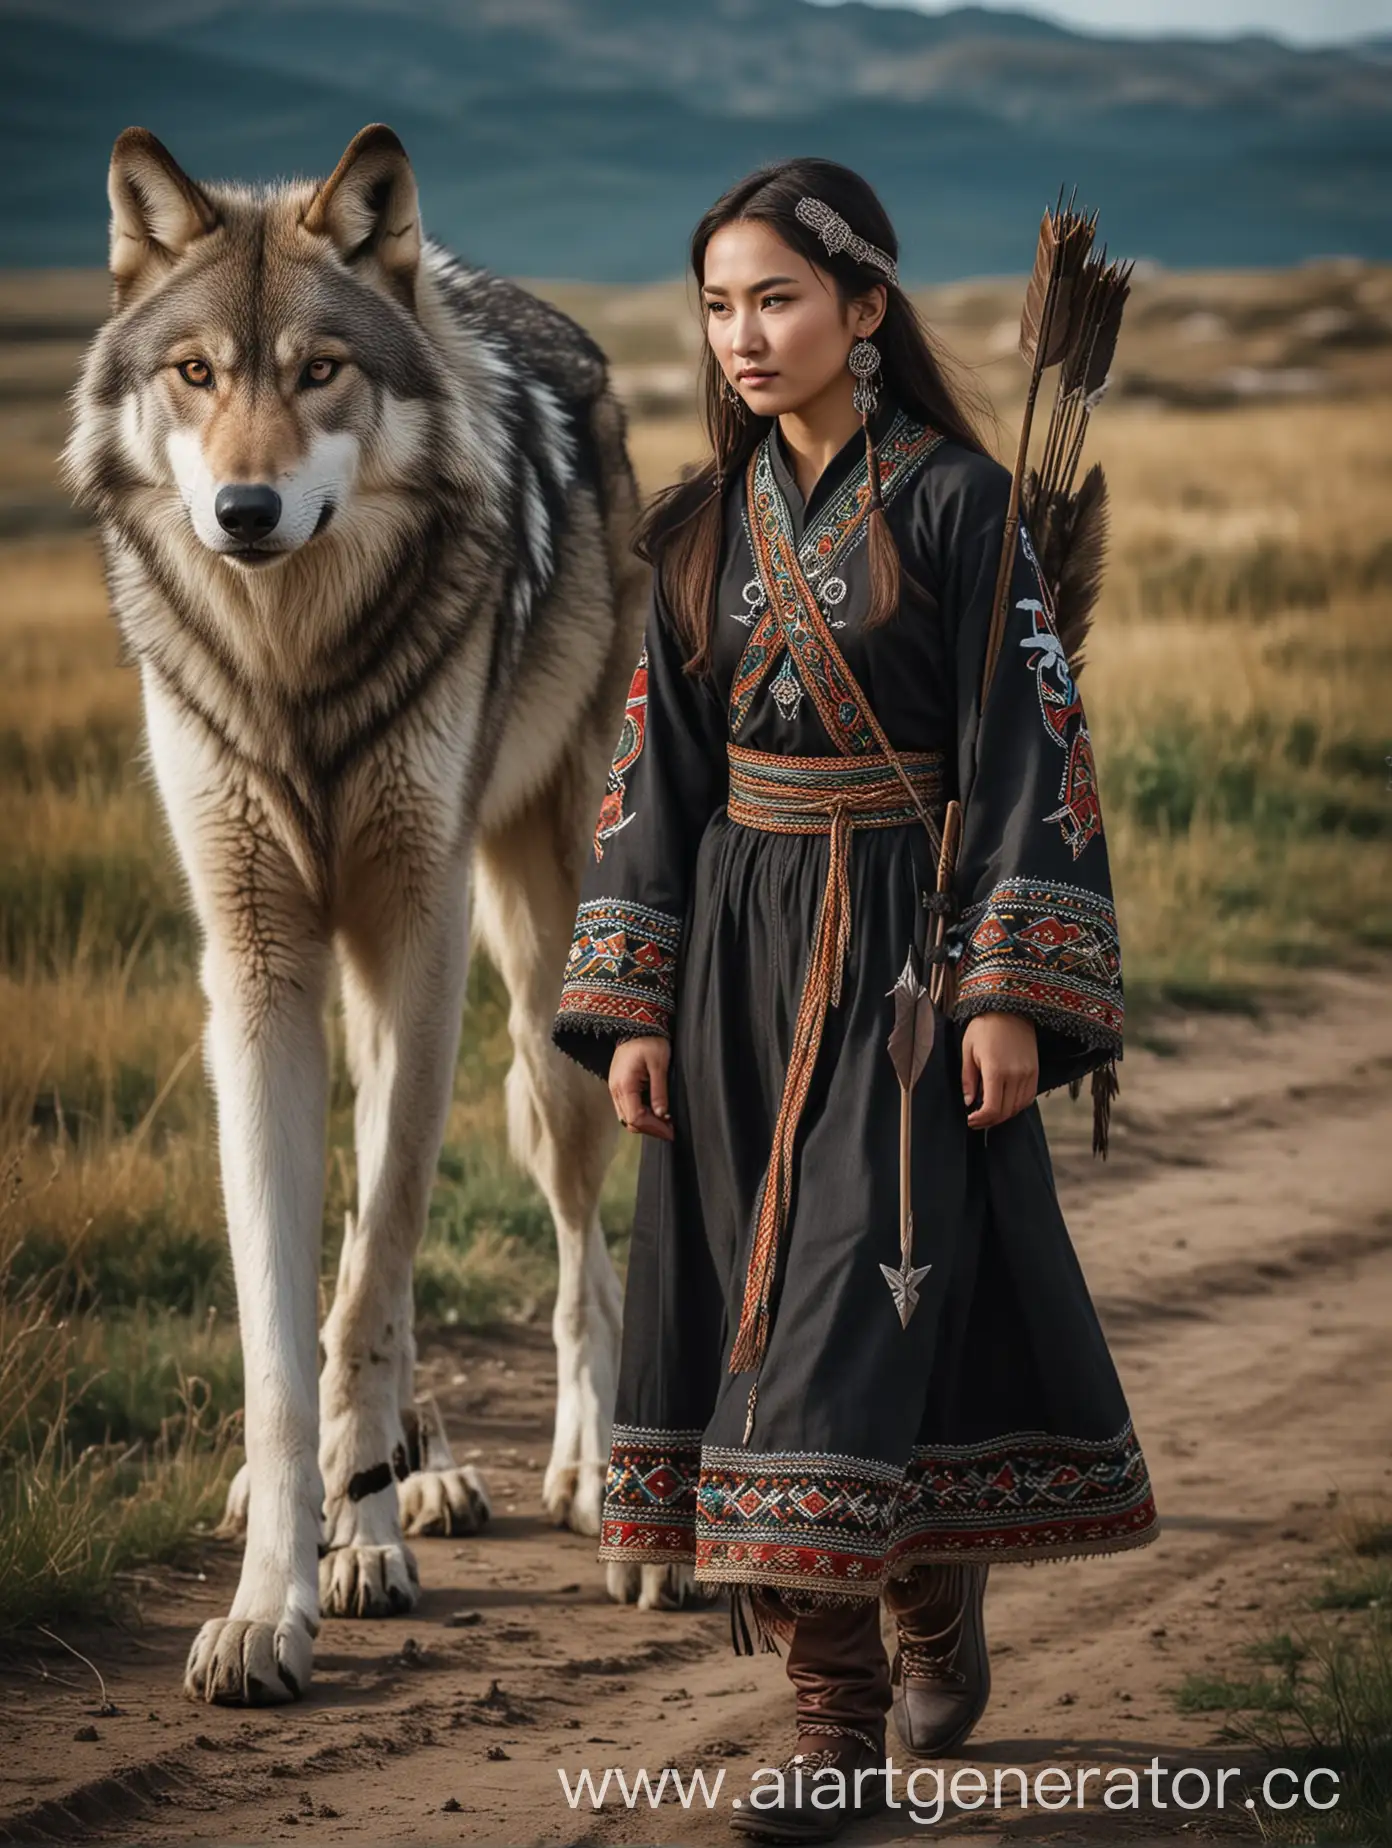 Kazakh-Woman-in-Traditional-Attire-with-Wolf-Companion